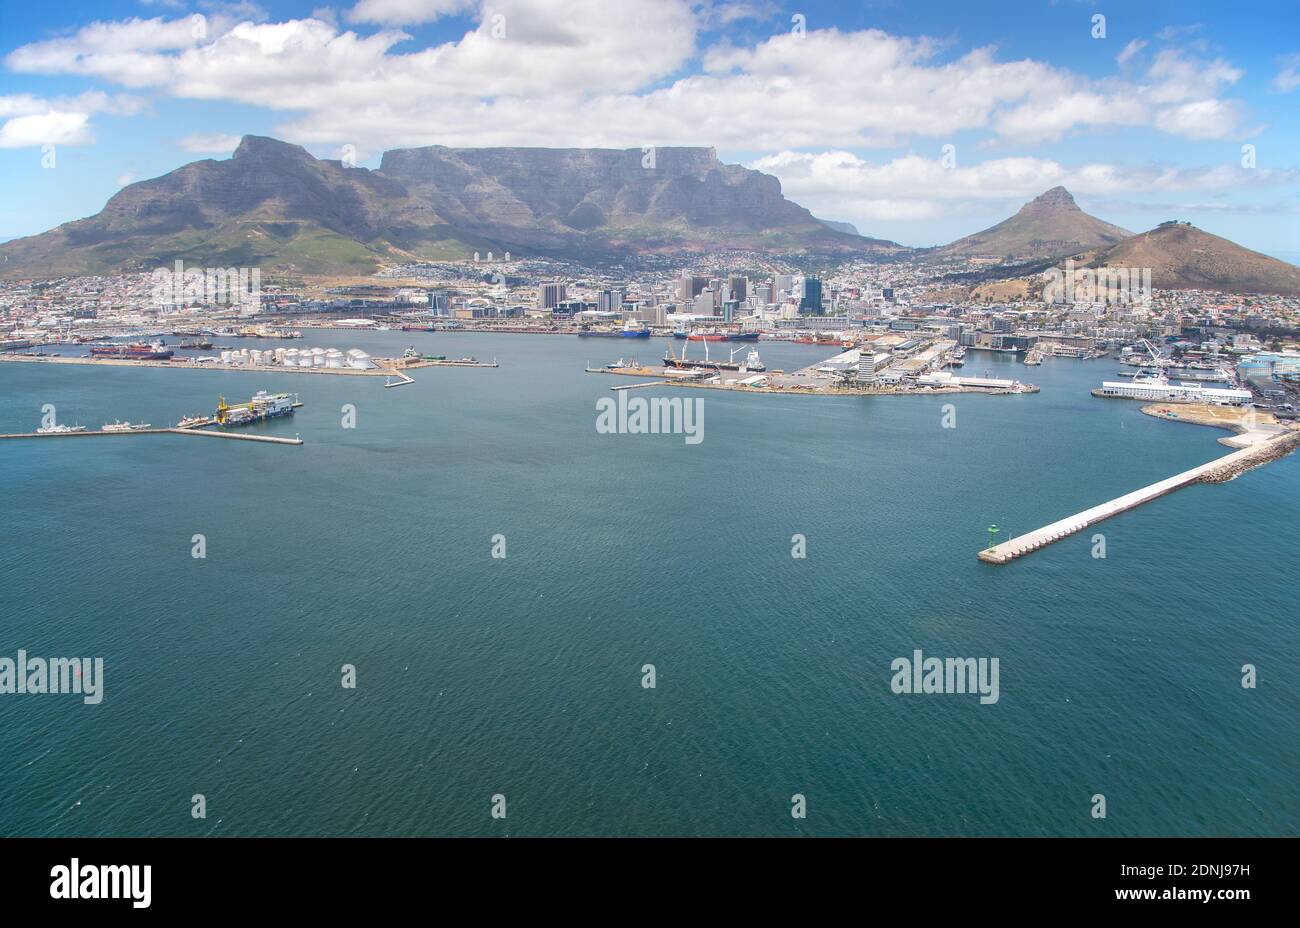 Cape Town, Western Cape / South Africa - 11/26/2020: Aerial photo of V&A Waterfront helipads and breakwater with Table Mountain in the background Stock Photo